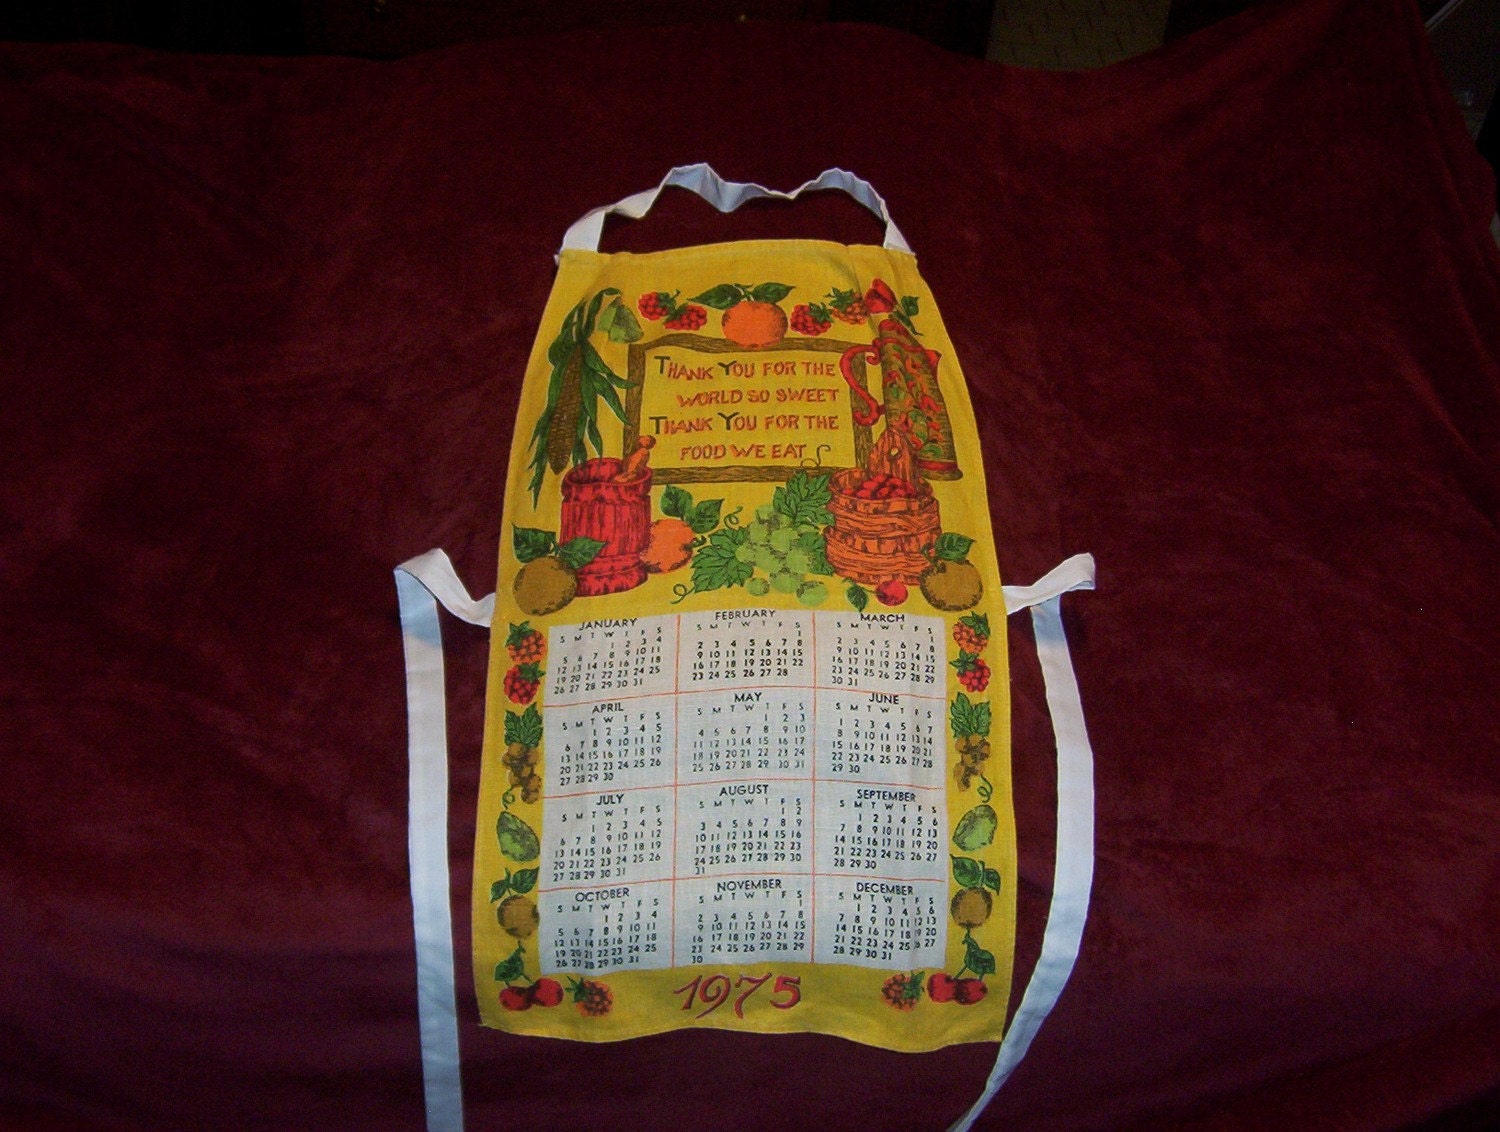 Vintage Linen Towel Calendar Apron Year 1975 Great Gift if this is a Memorible Year for One Includes Sweet Prayer Blessing